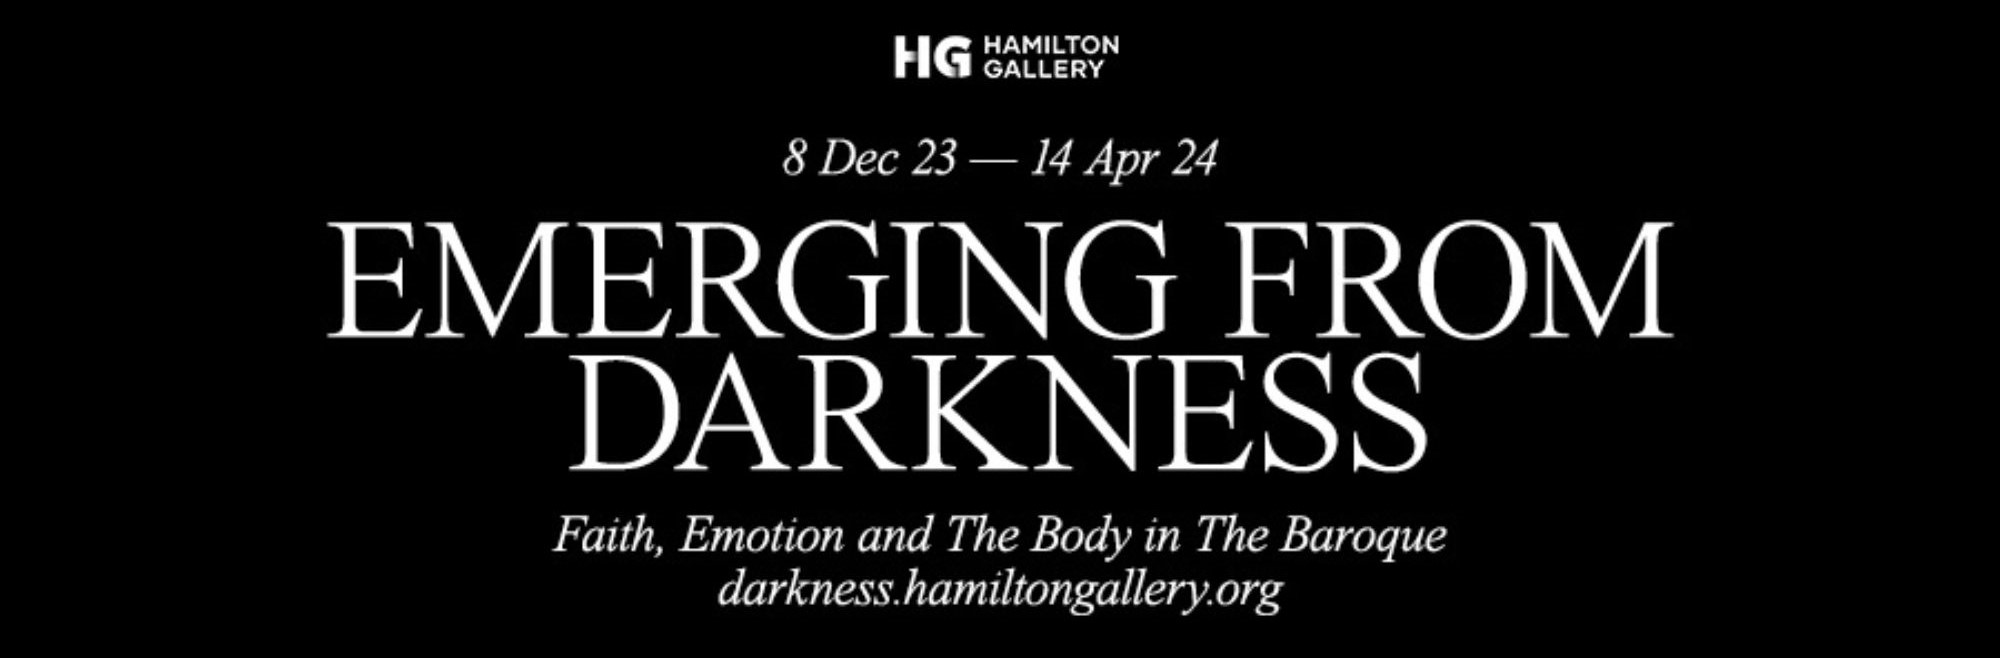 Hamilton Gallery Emerging from Darkness